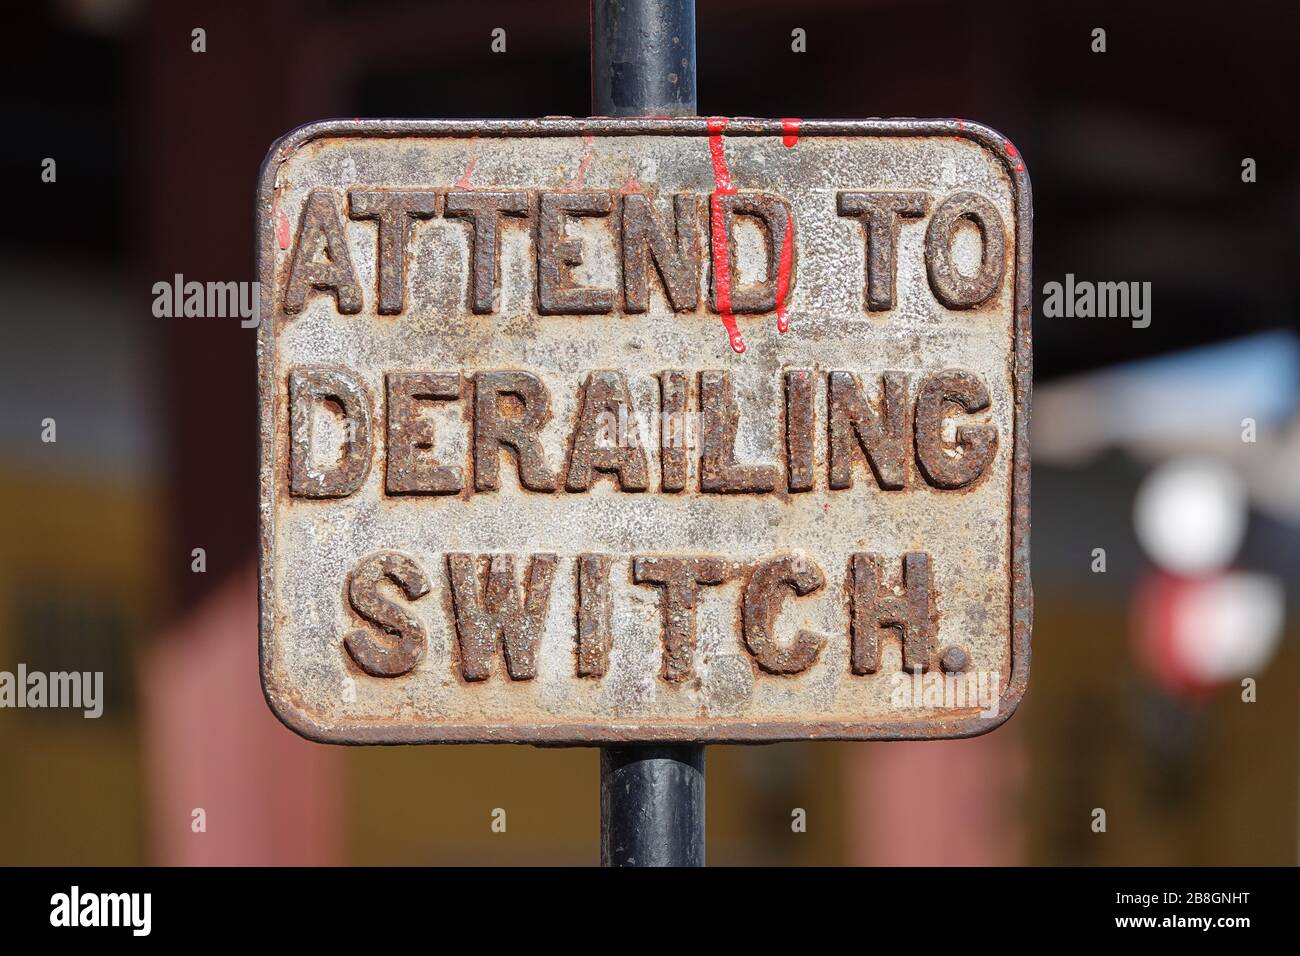 Attend to derailing switch Stock Photo